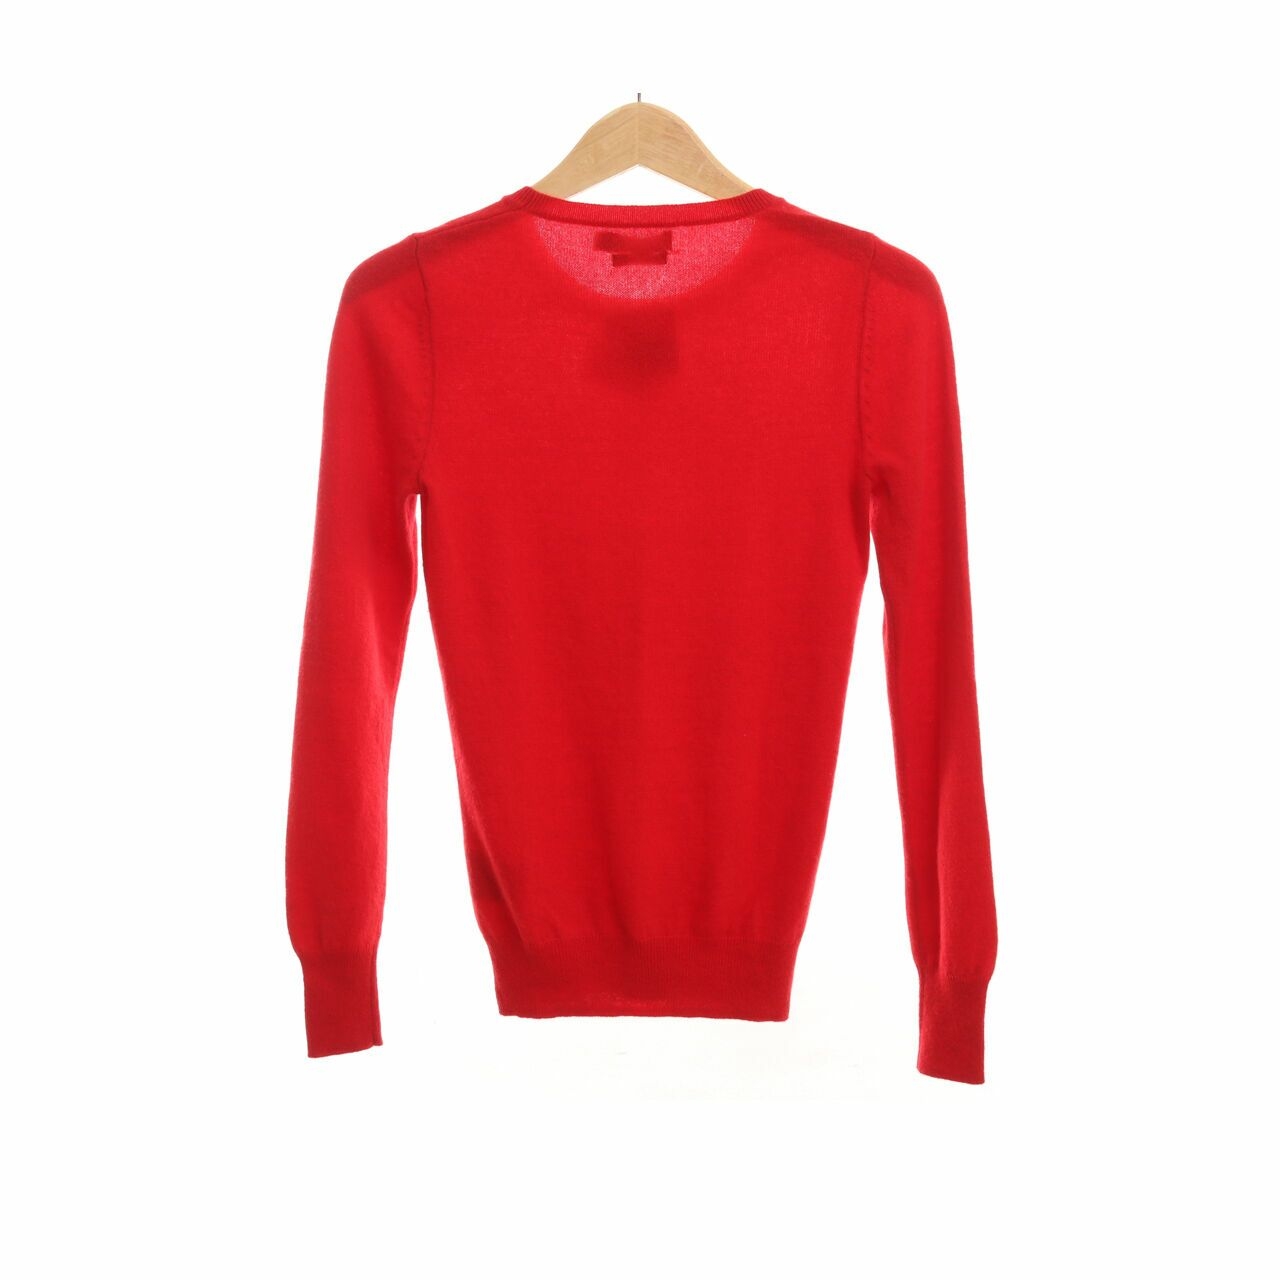 Galeries Lafayette Red Sweater